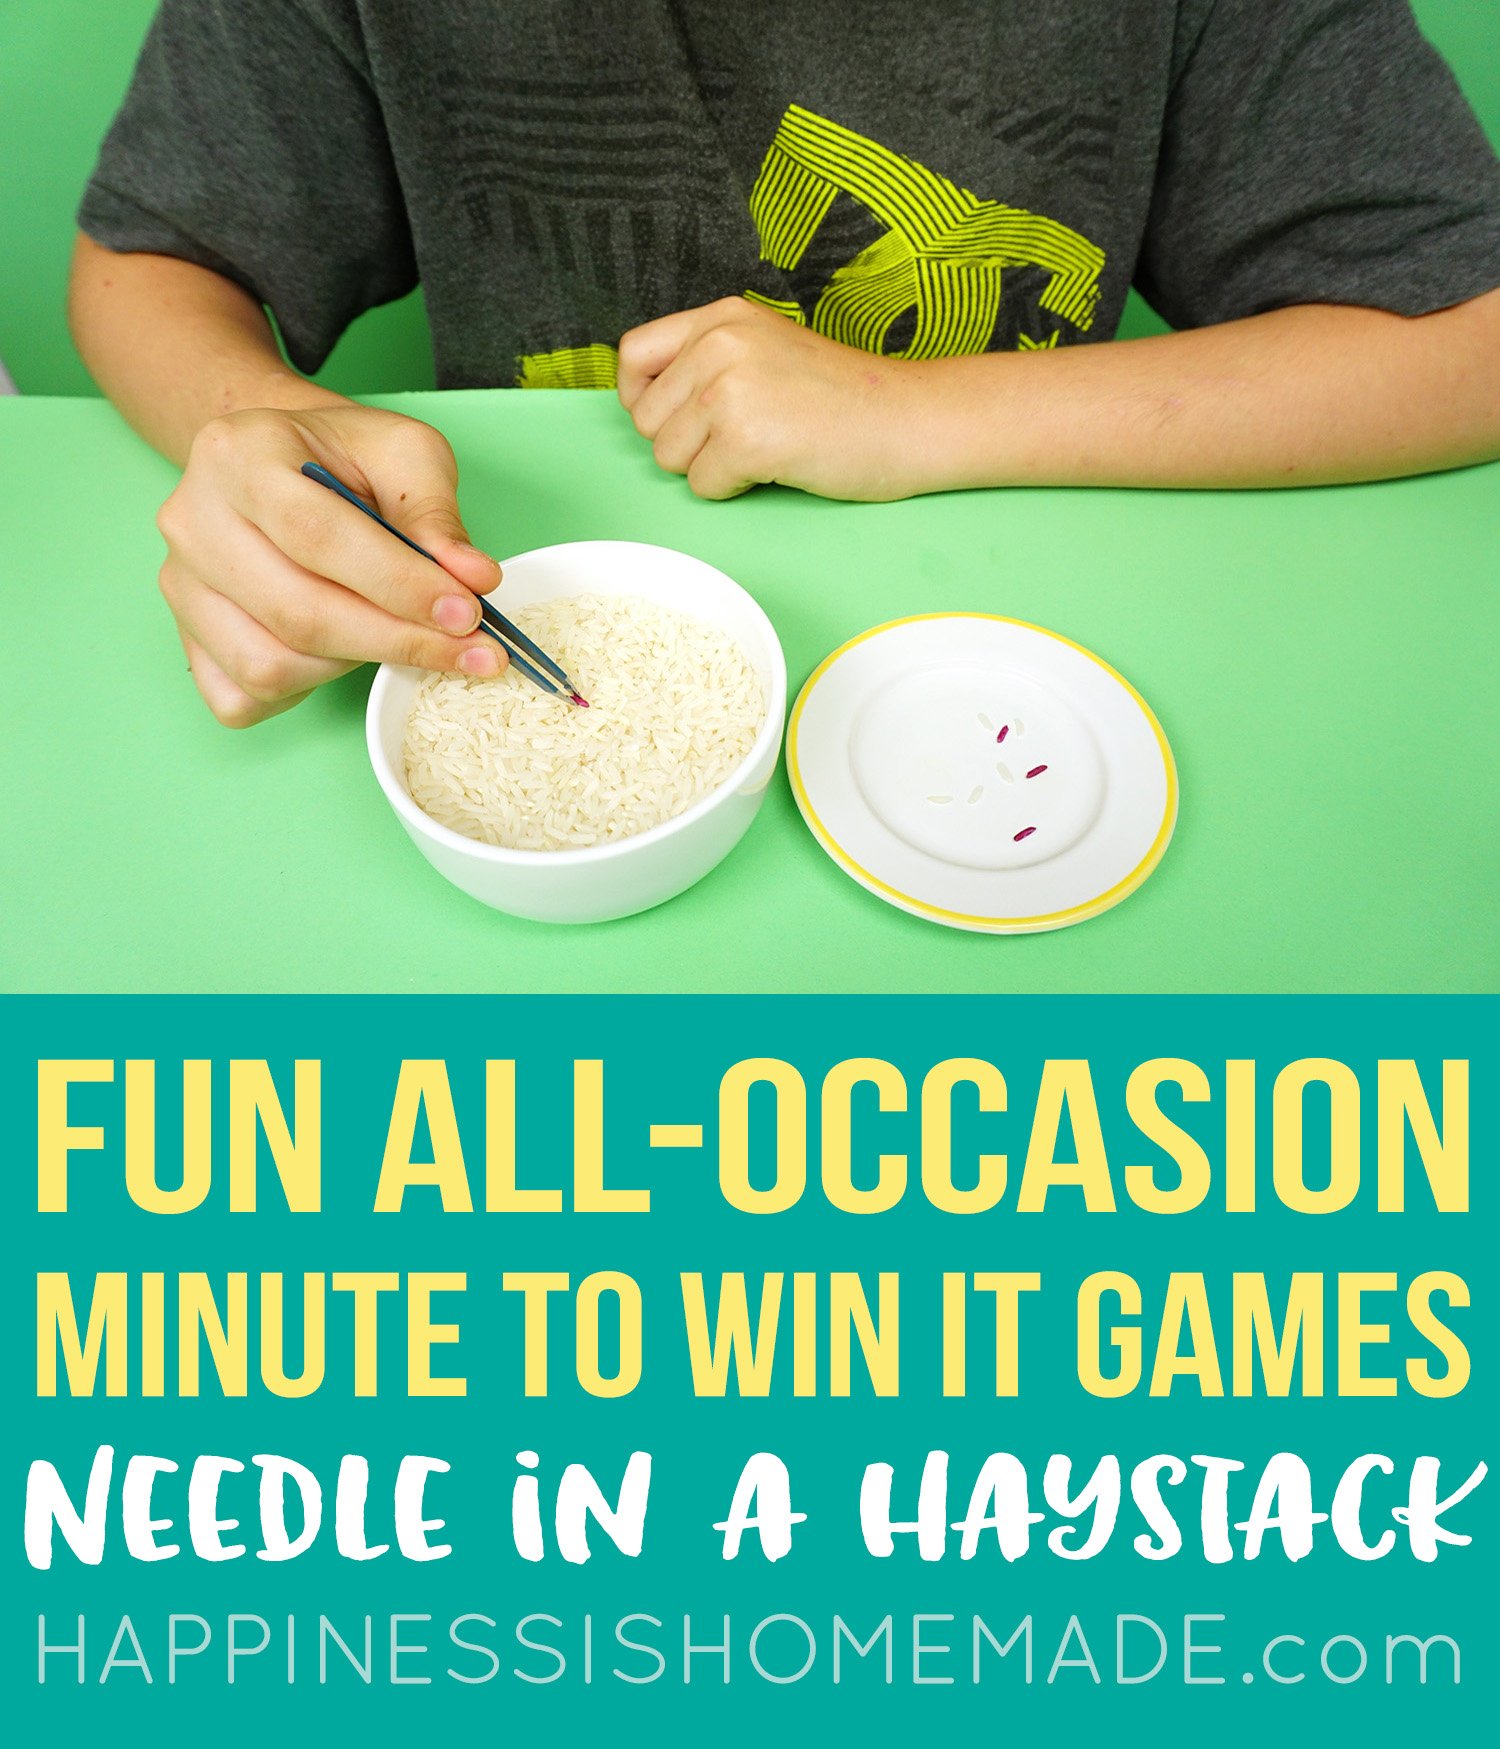 Fun Minute to Win It Games - Needle in a Haystack